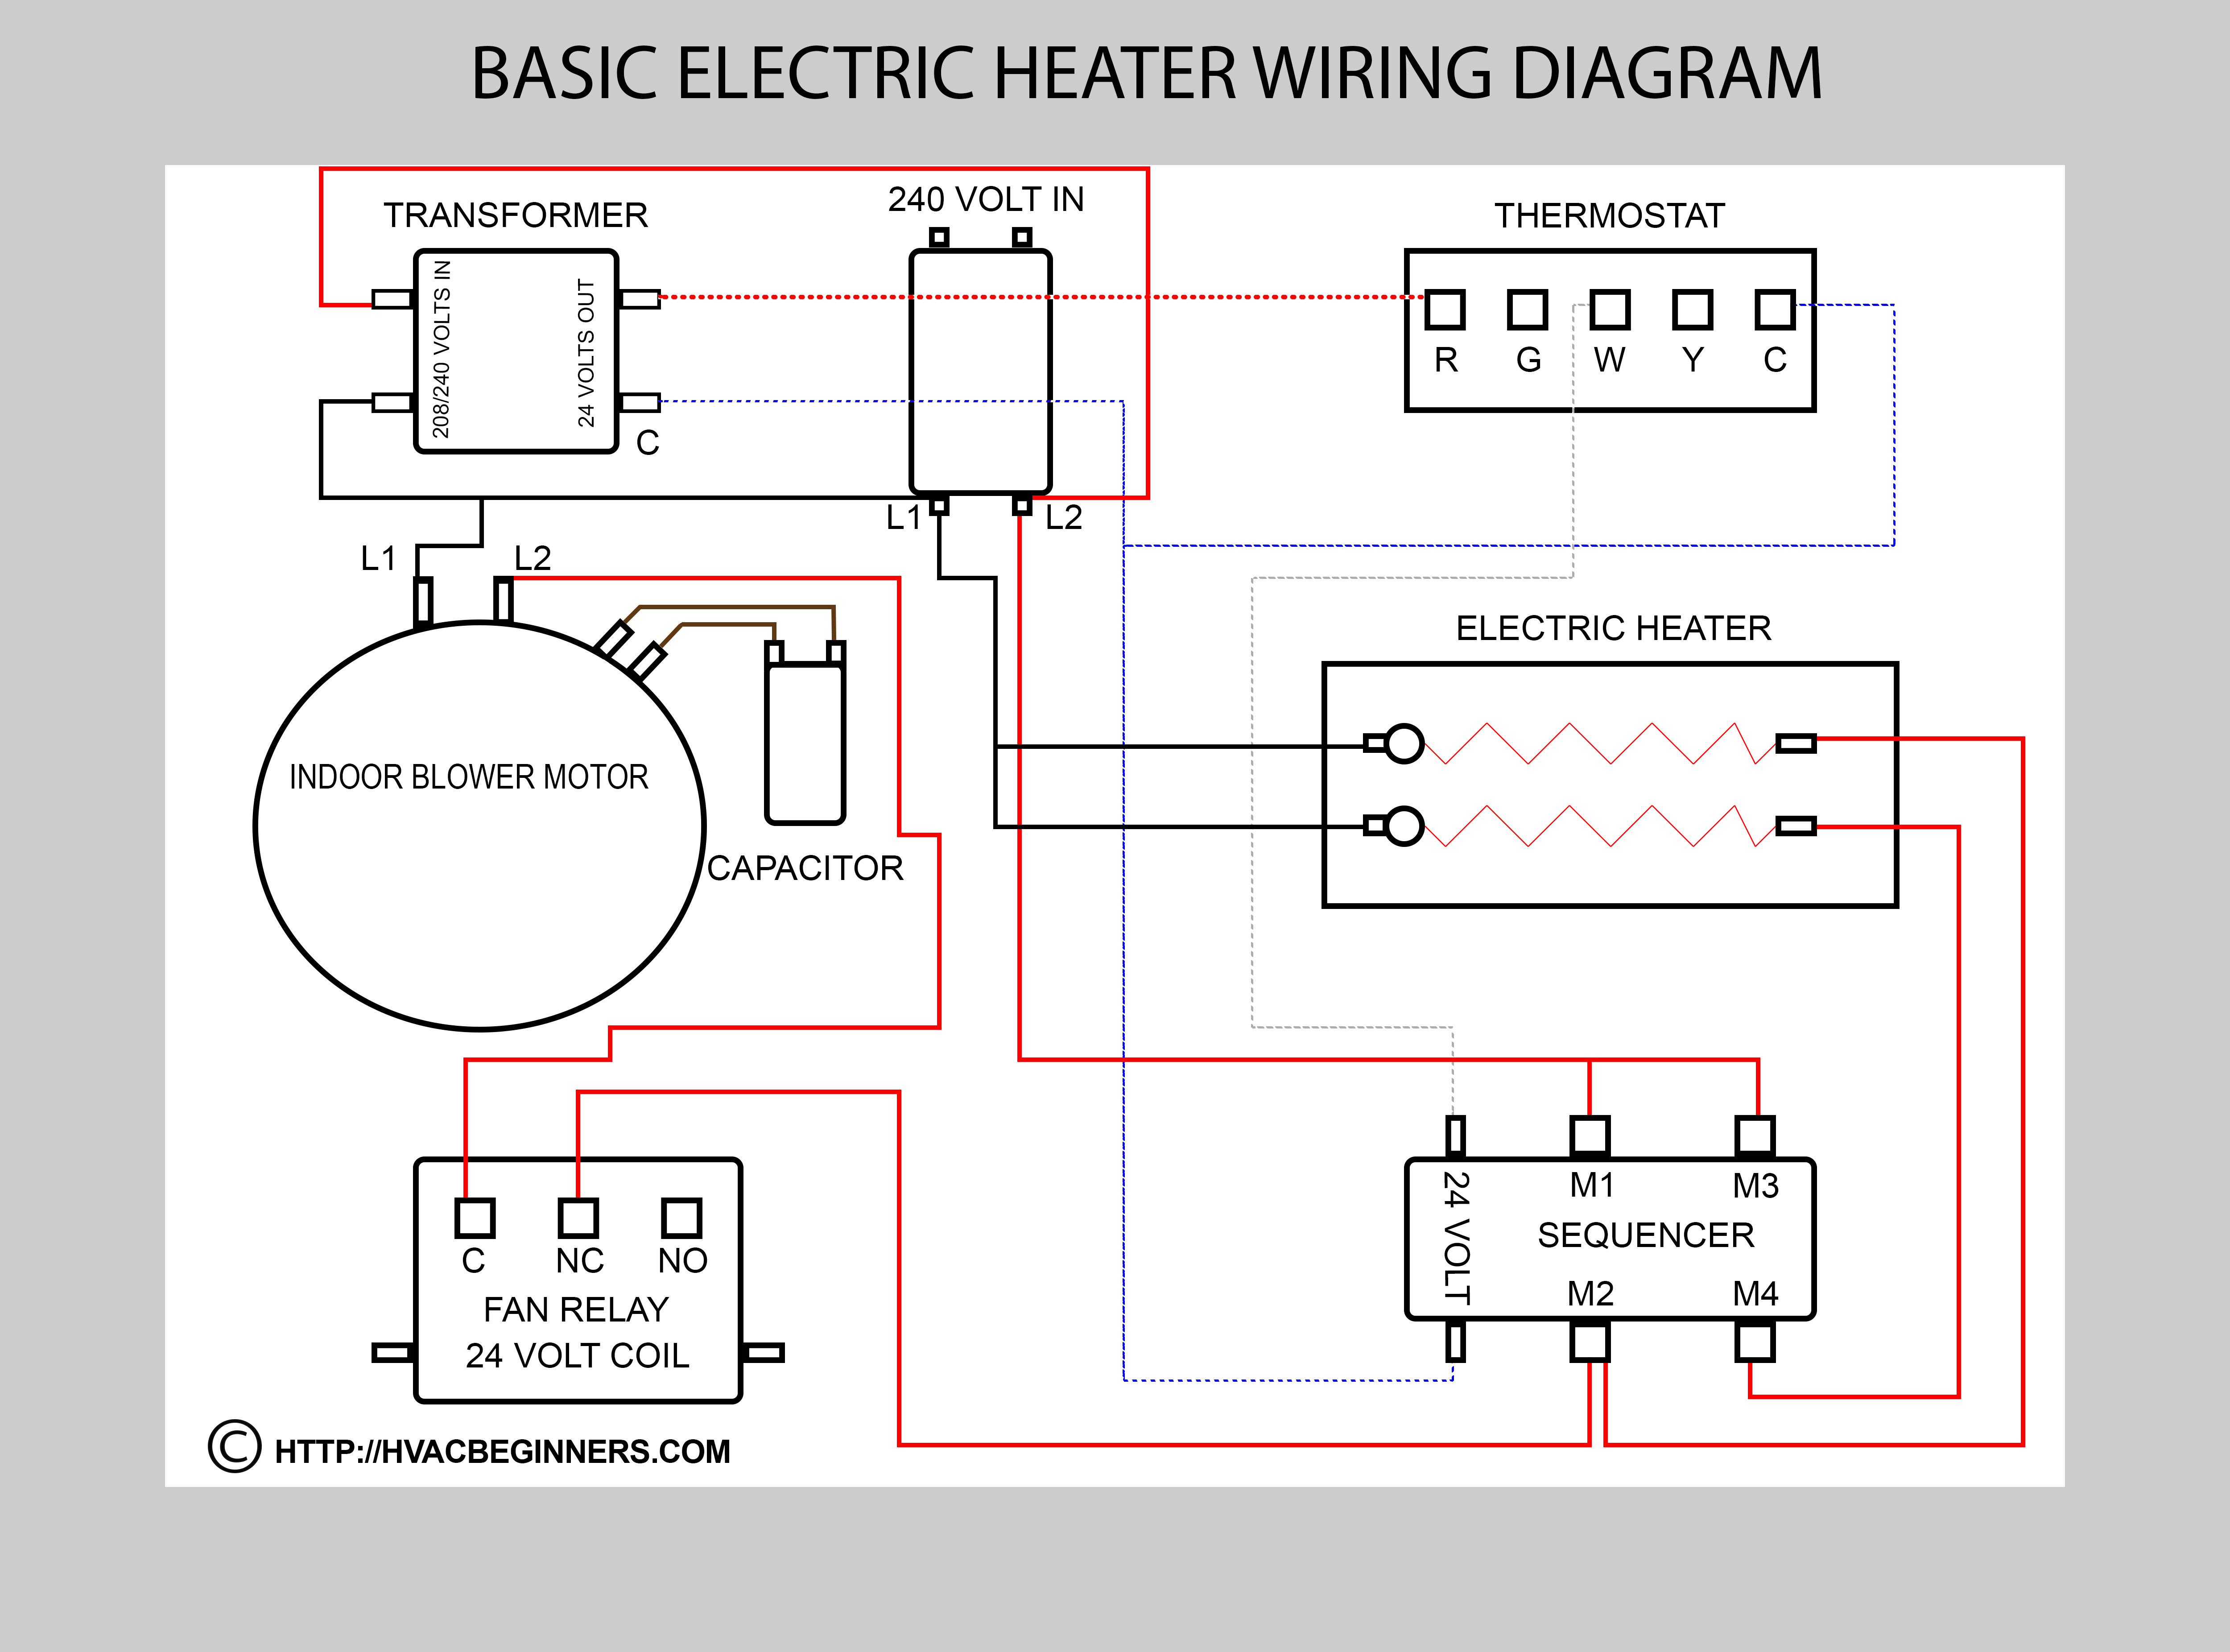 Ac Wire Diagrams | Wiring Diagram - Central Ac Wiring Diagram